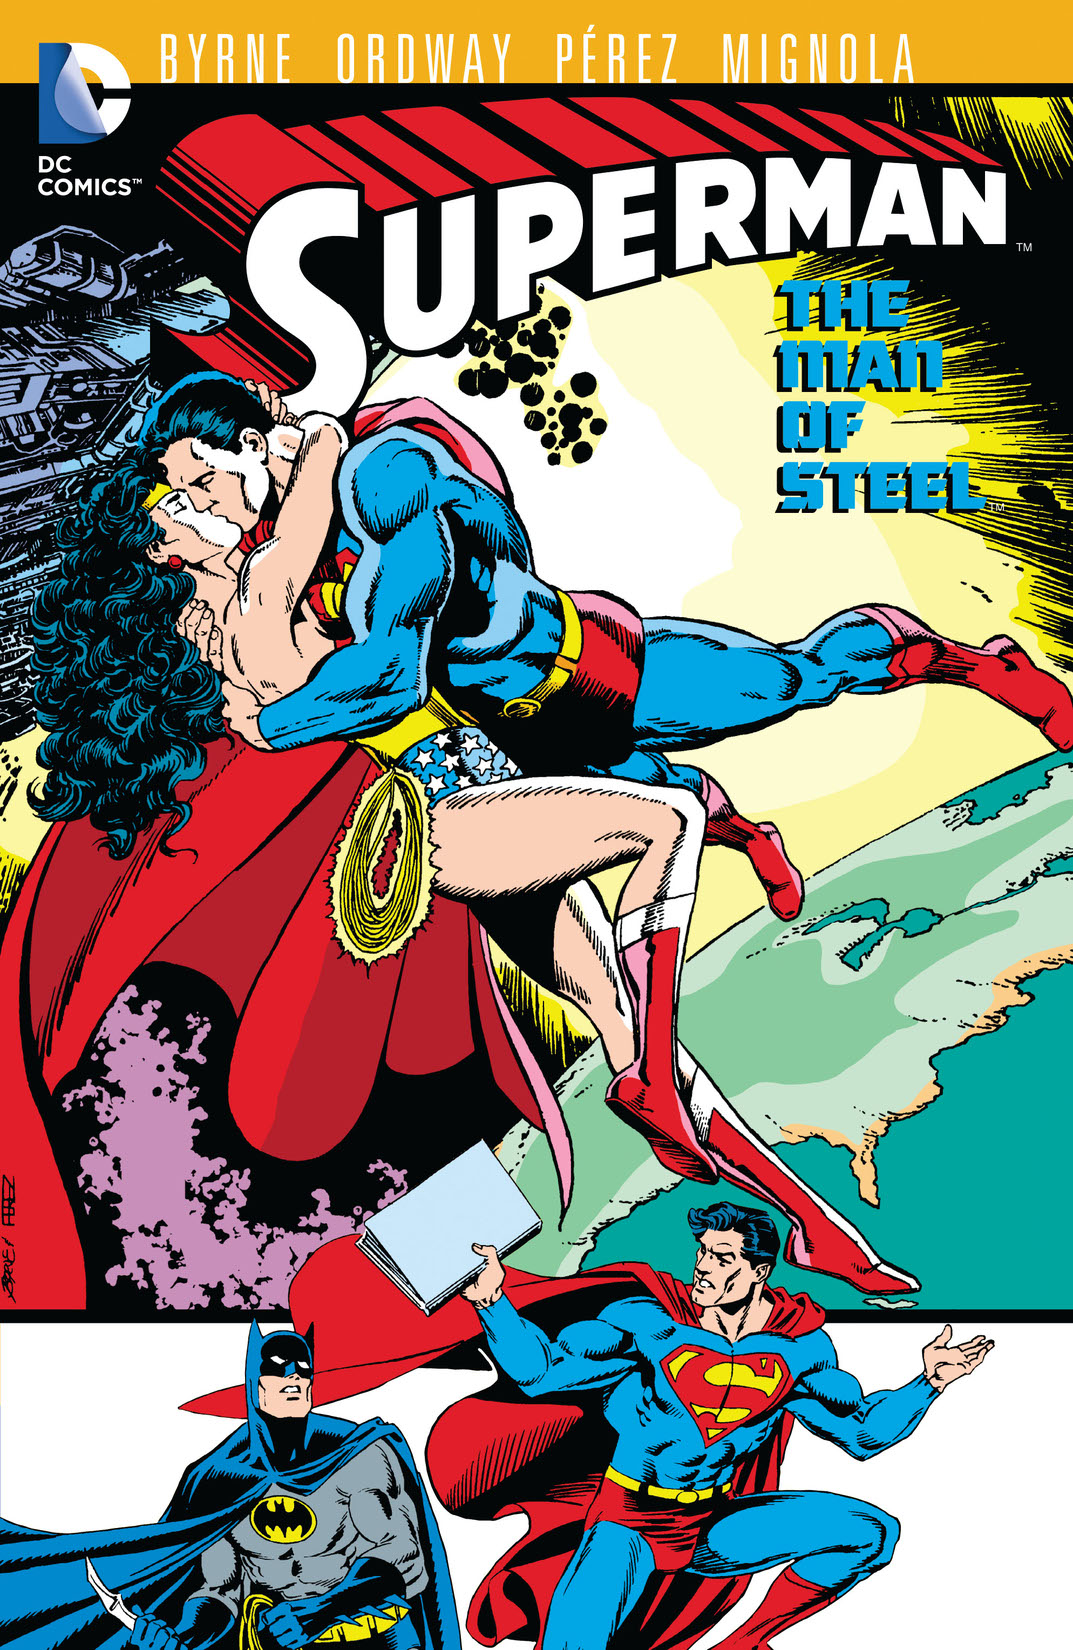 Superman: The Man of Steel Vol. 8 preview images